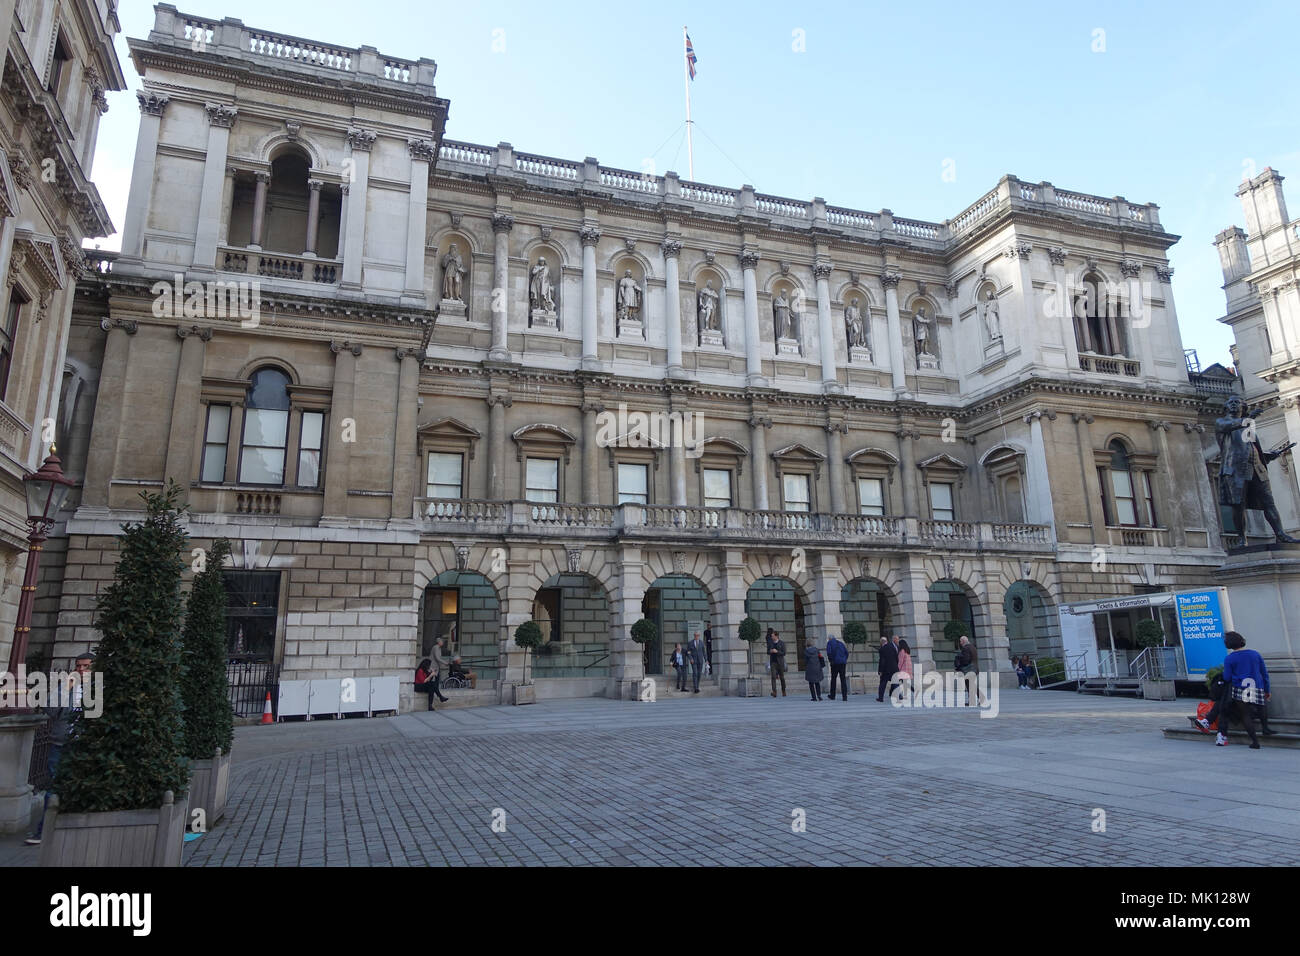 View of The Royal Academy of Arts building within Burlington House in Piccadilly London Stock Photo